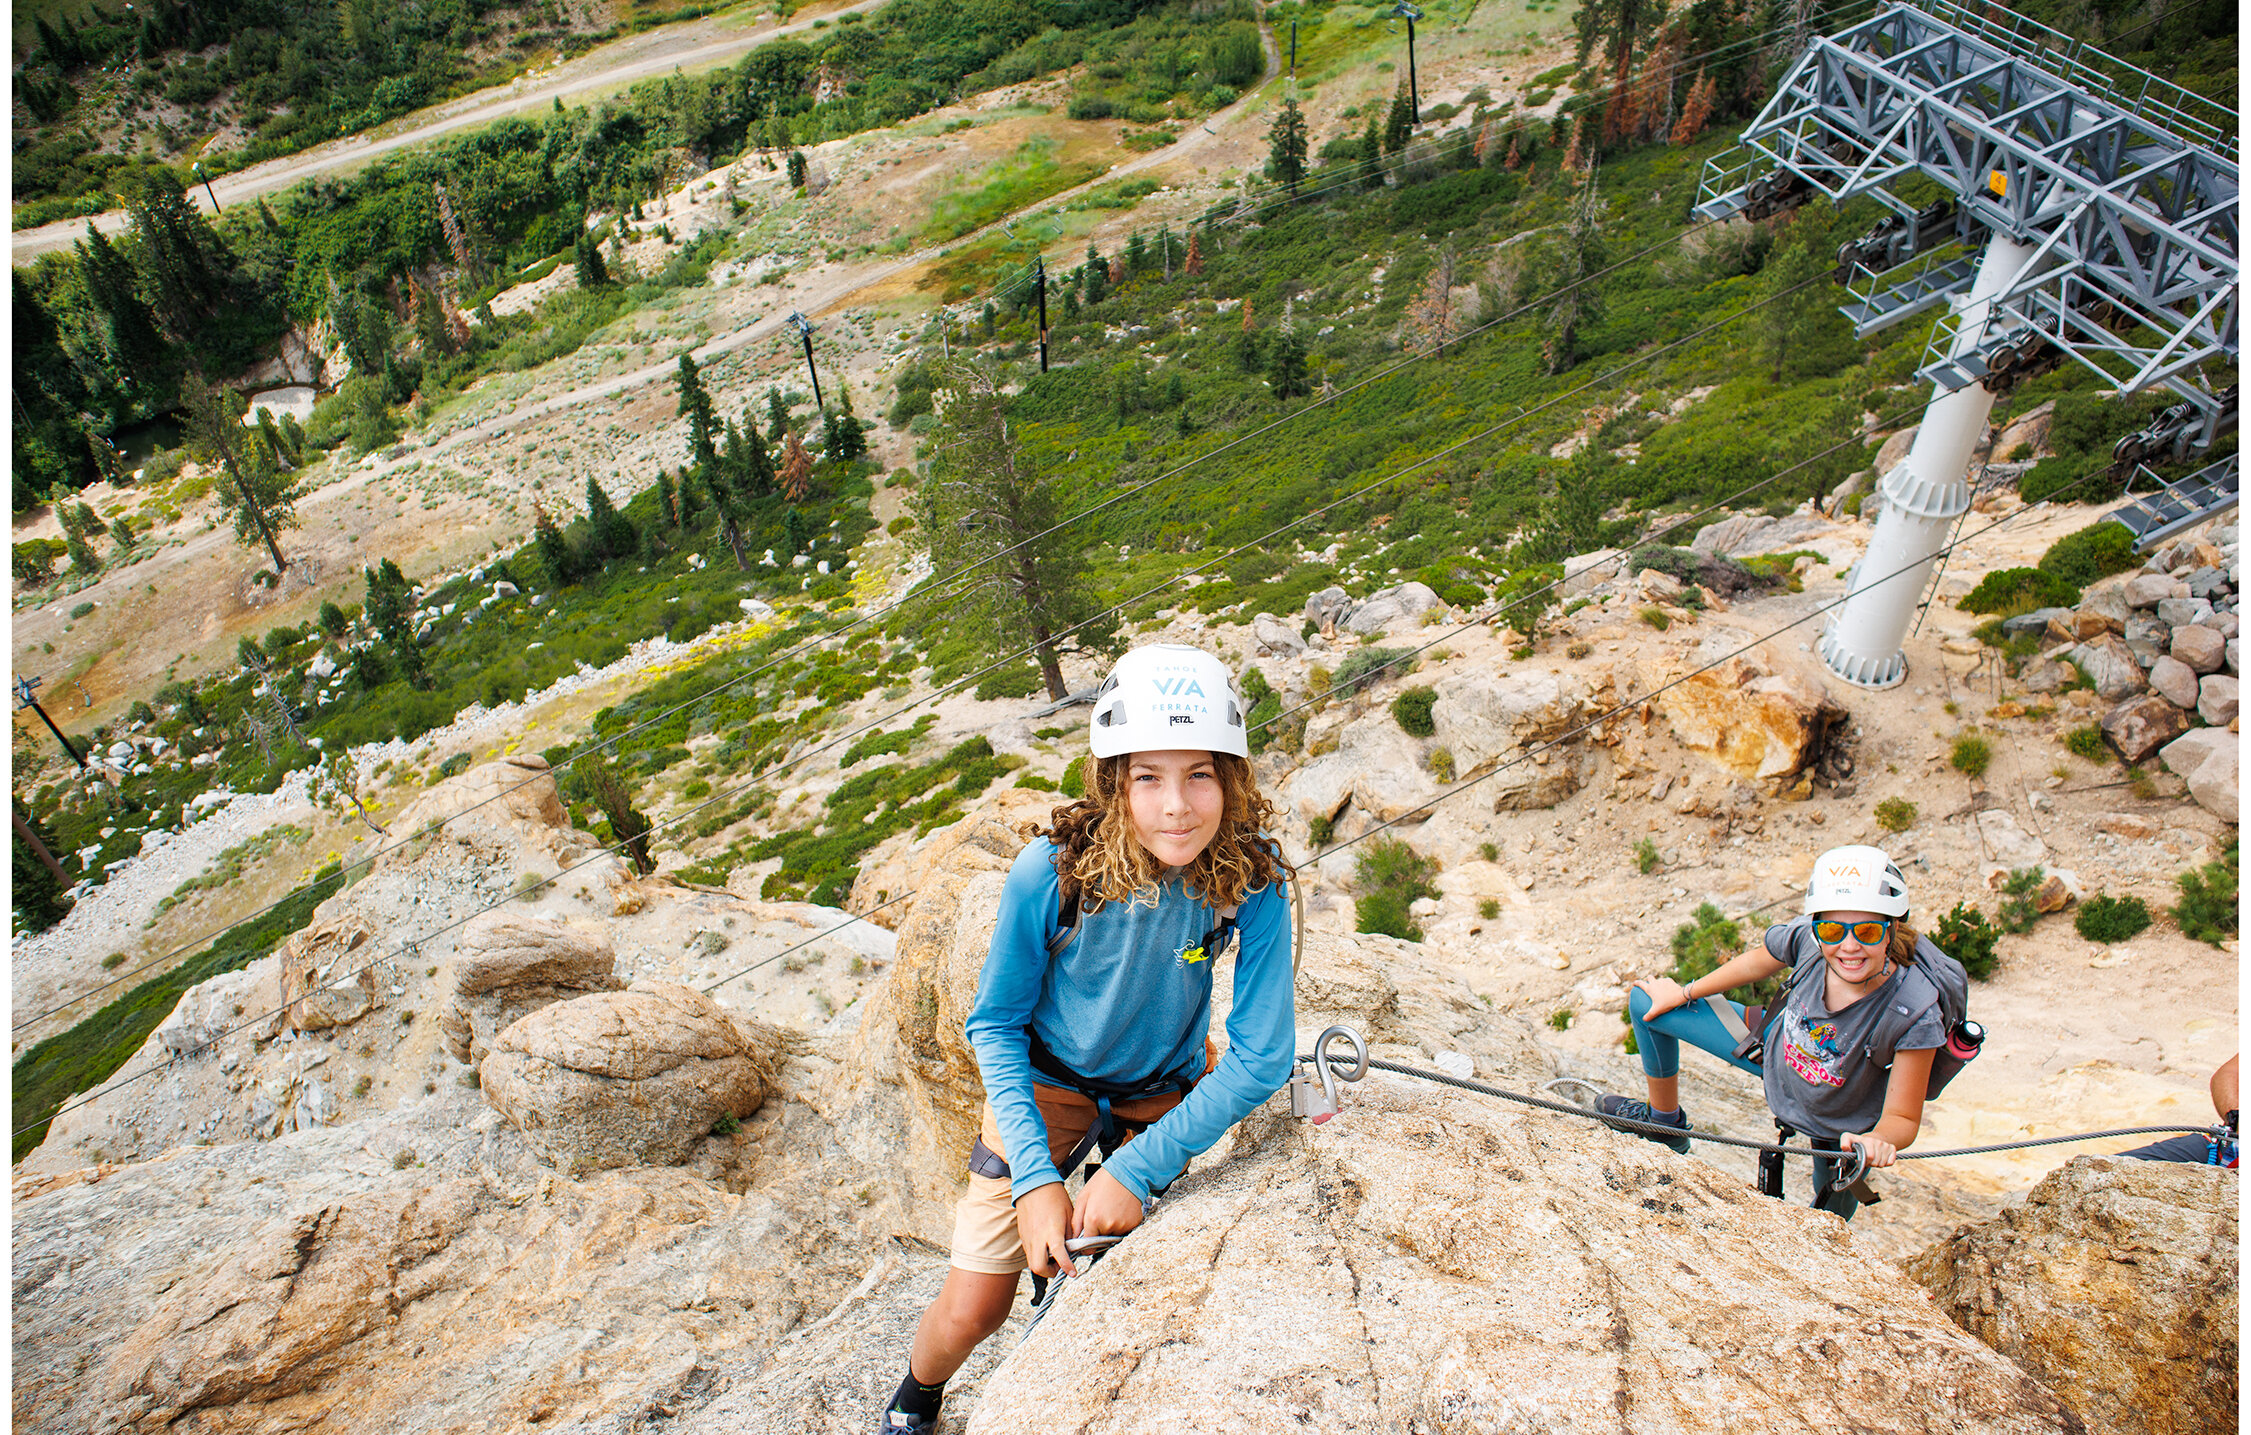 Our 5-Day Kids Rock Climbing Camp is a great way to get your kids outside for a week of activity and climbing development, whether they are new to the sport or have years of experience. Throughout the week, your child will climb on the Tahoe Via in Olympic Valley and on Donner Summit, as well as participate in several activities including map and compass scavenger hunts, knot tying, educational hikes in Shirley Canyon, and more.